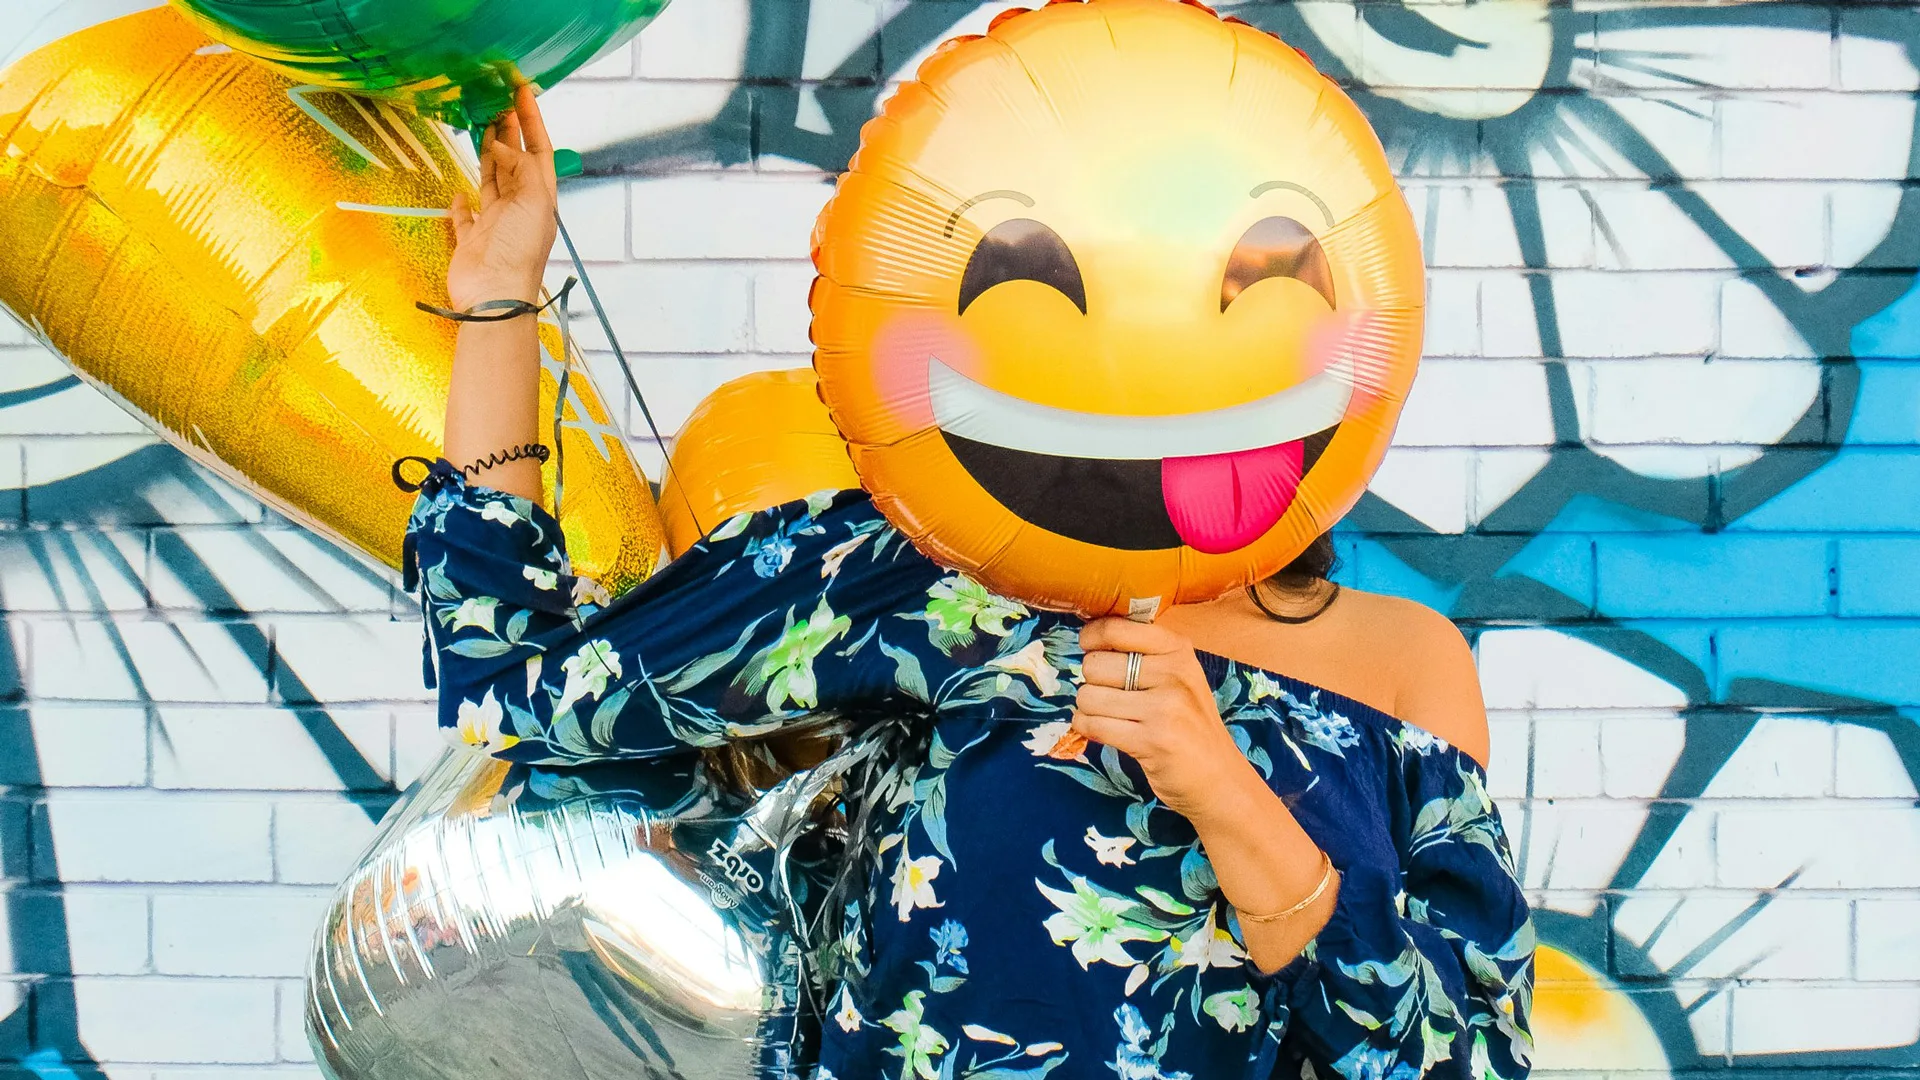 A photograph of a woman holding a balloon of a smiling emoji